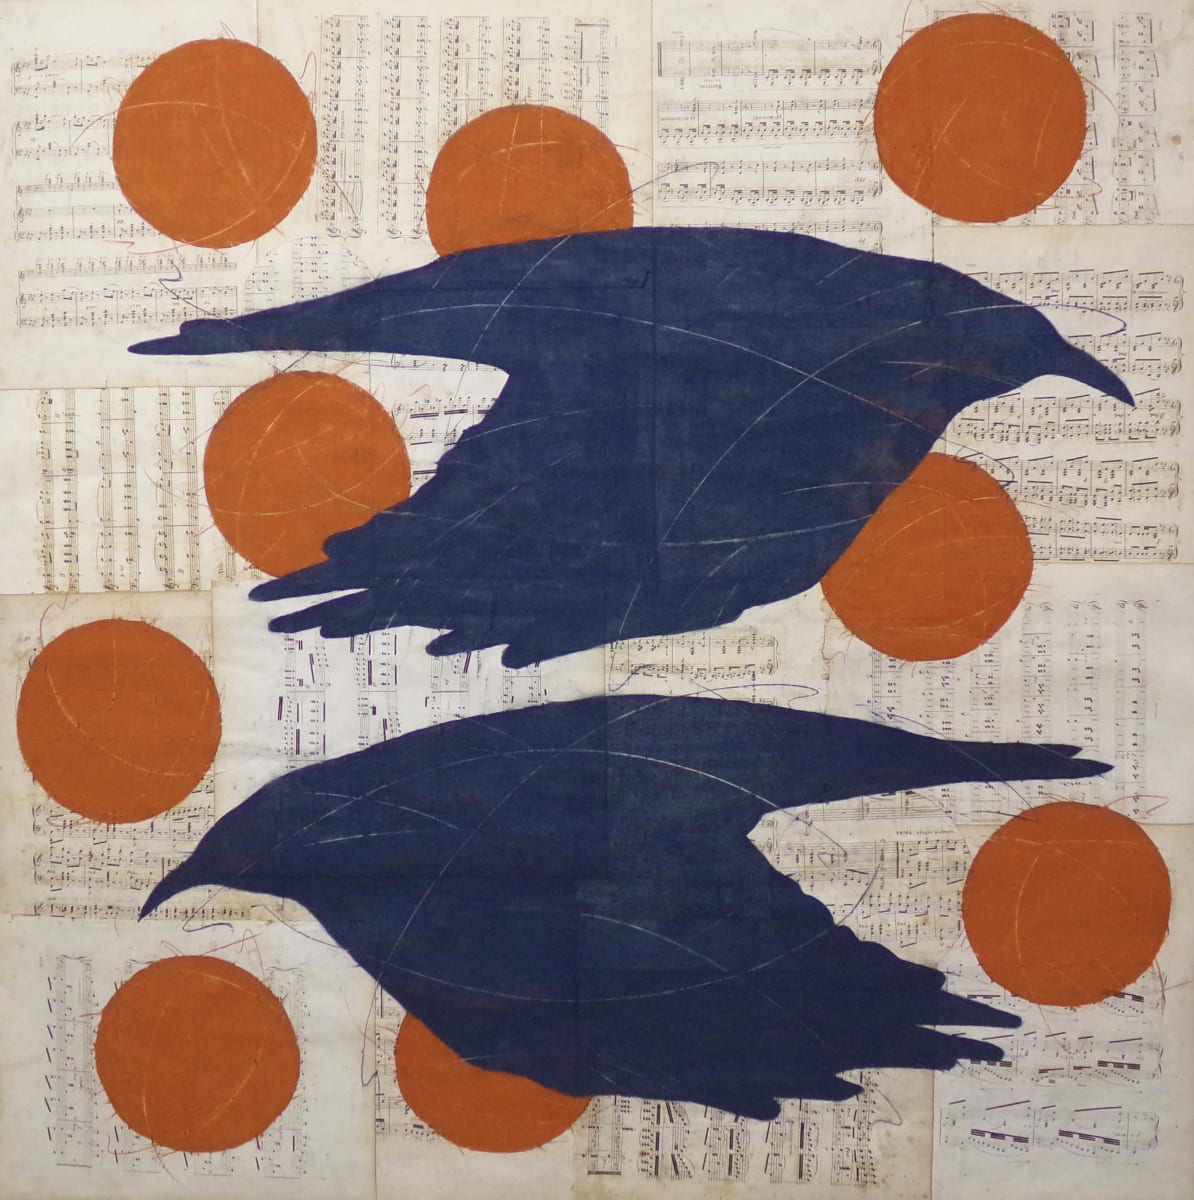 Grey Birds Red Moons by Louise Laplante  Image: Grey Birds Red Moons